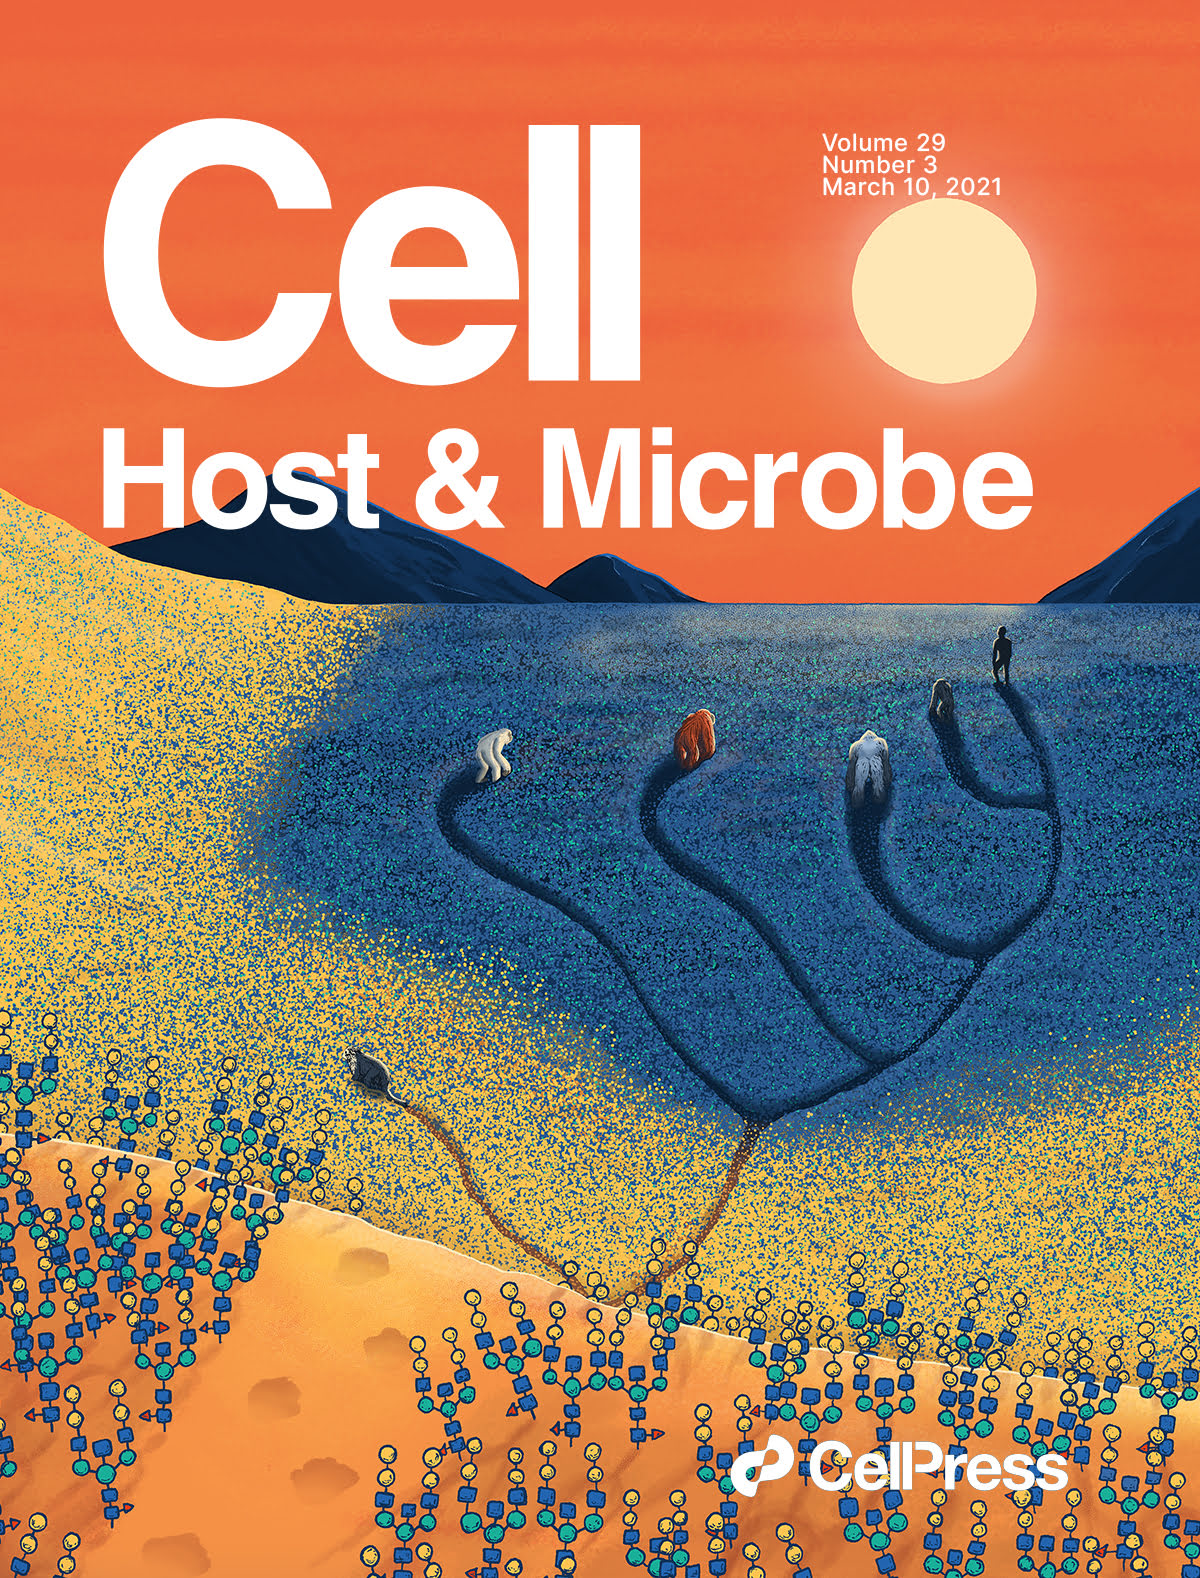 An illustrated cover for "Cell Host & Microbe". The cover shows primates travelling through a field towards mountains in the distance. 